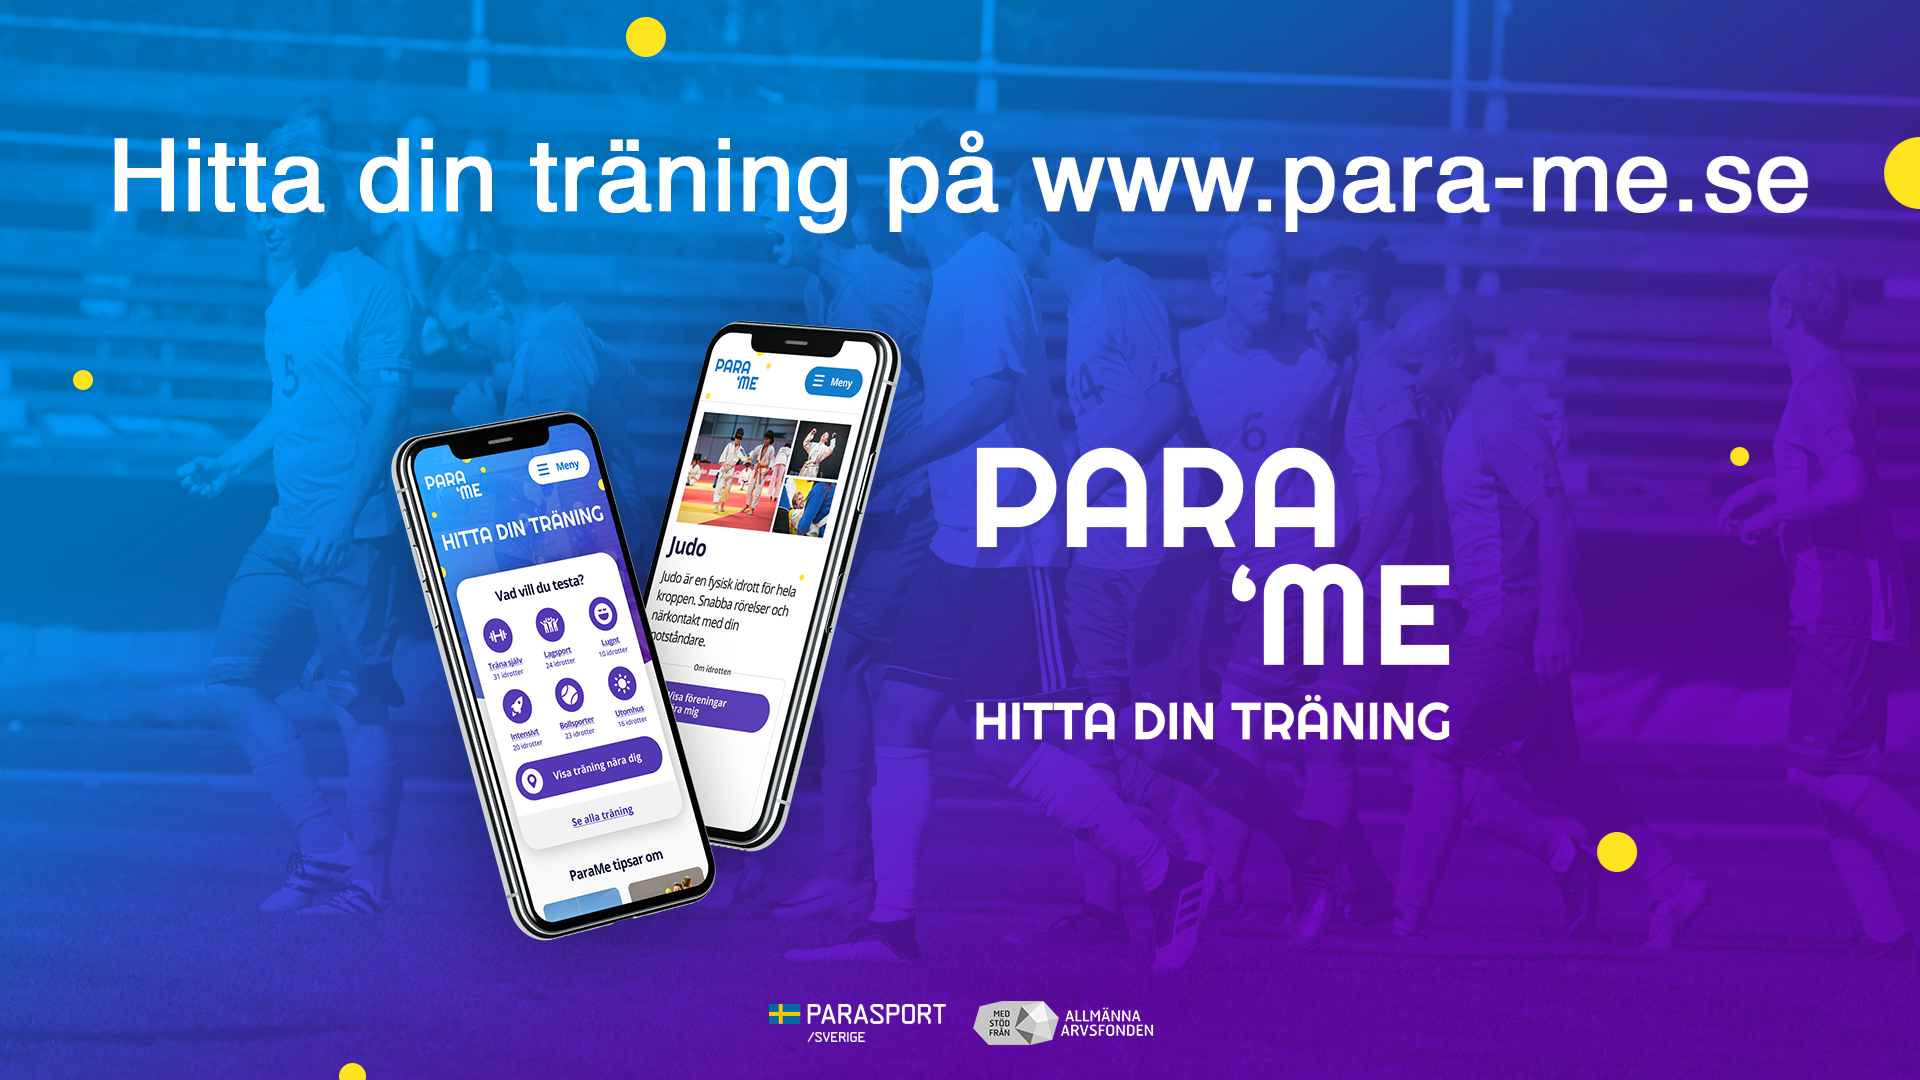 ParaMe was launched in September ©Parasport Sweden